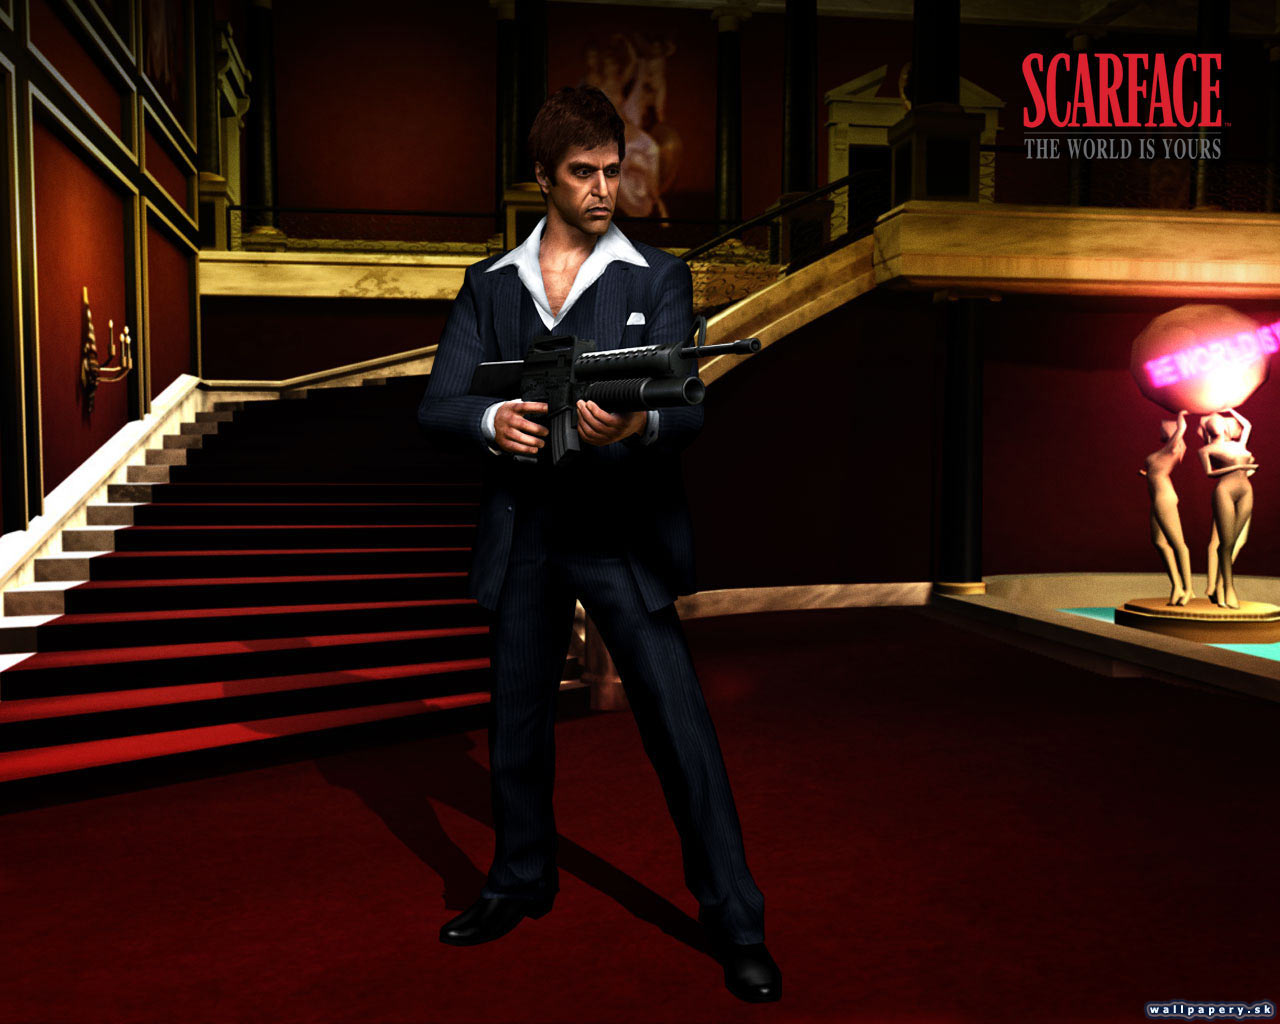 Scarface: The World Is Yours - wallpaper 4